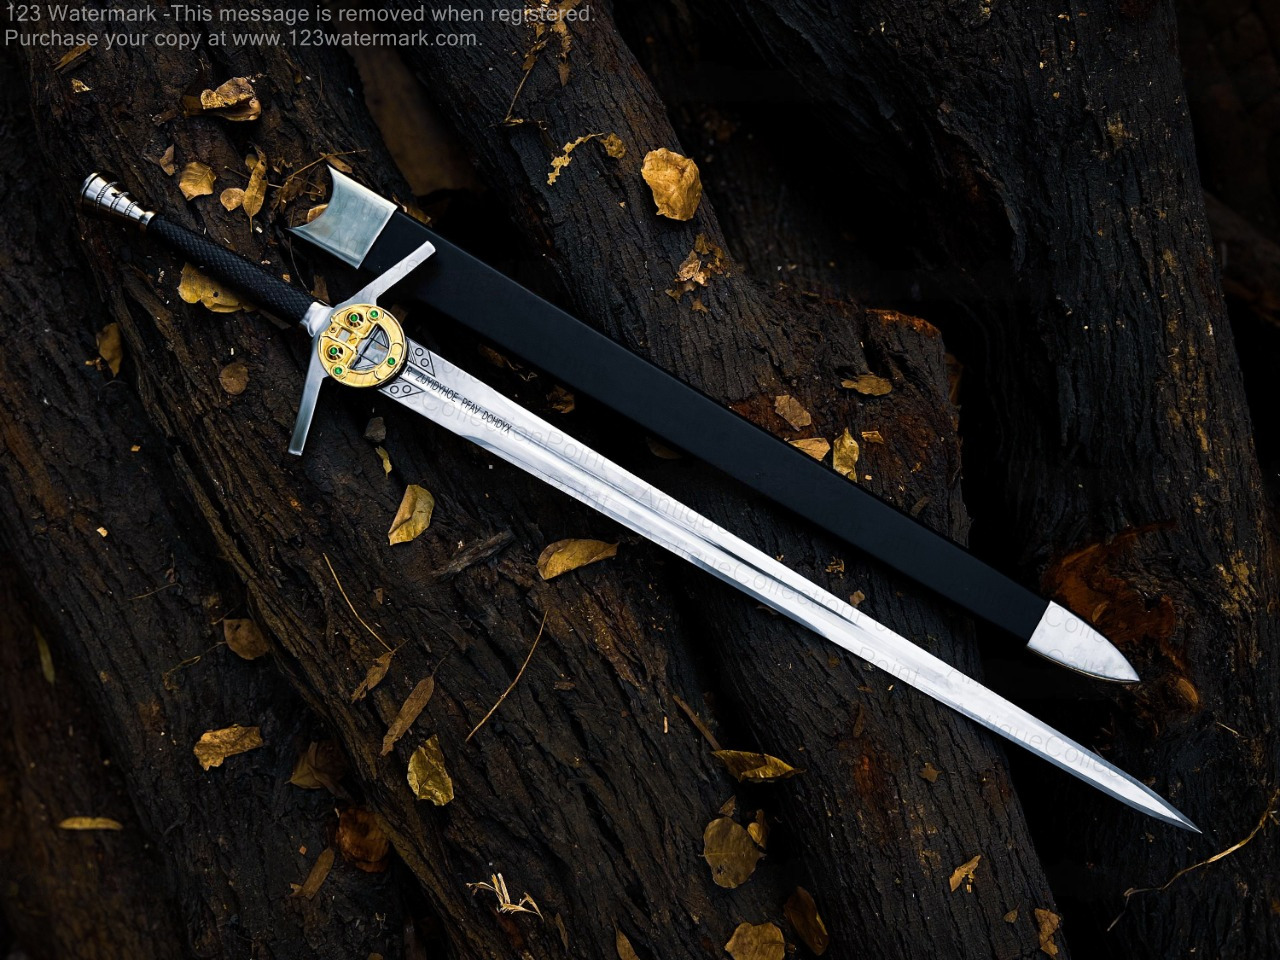 The Witcher Sword Geralt of Rivia With Renfri's Brooch Netflix's With Scabbard